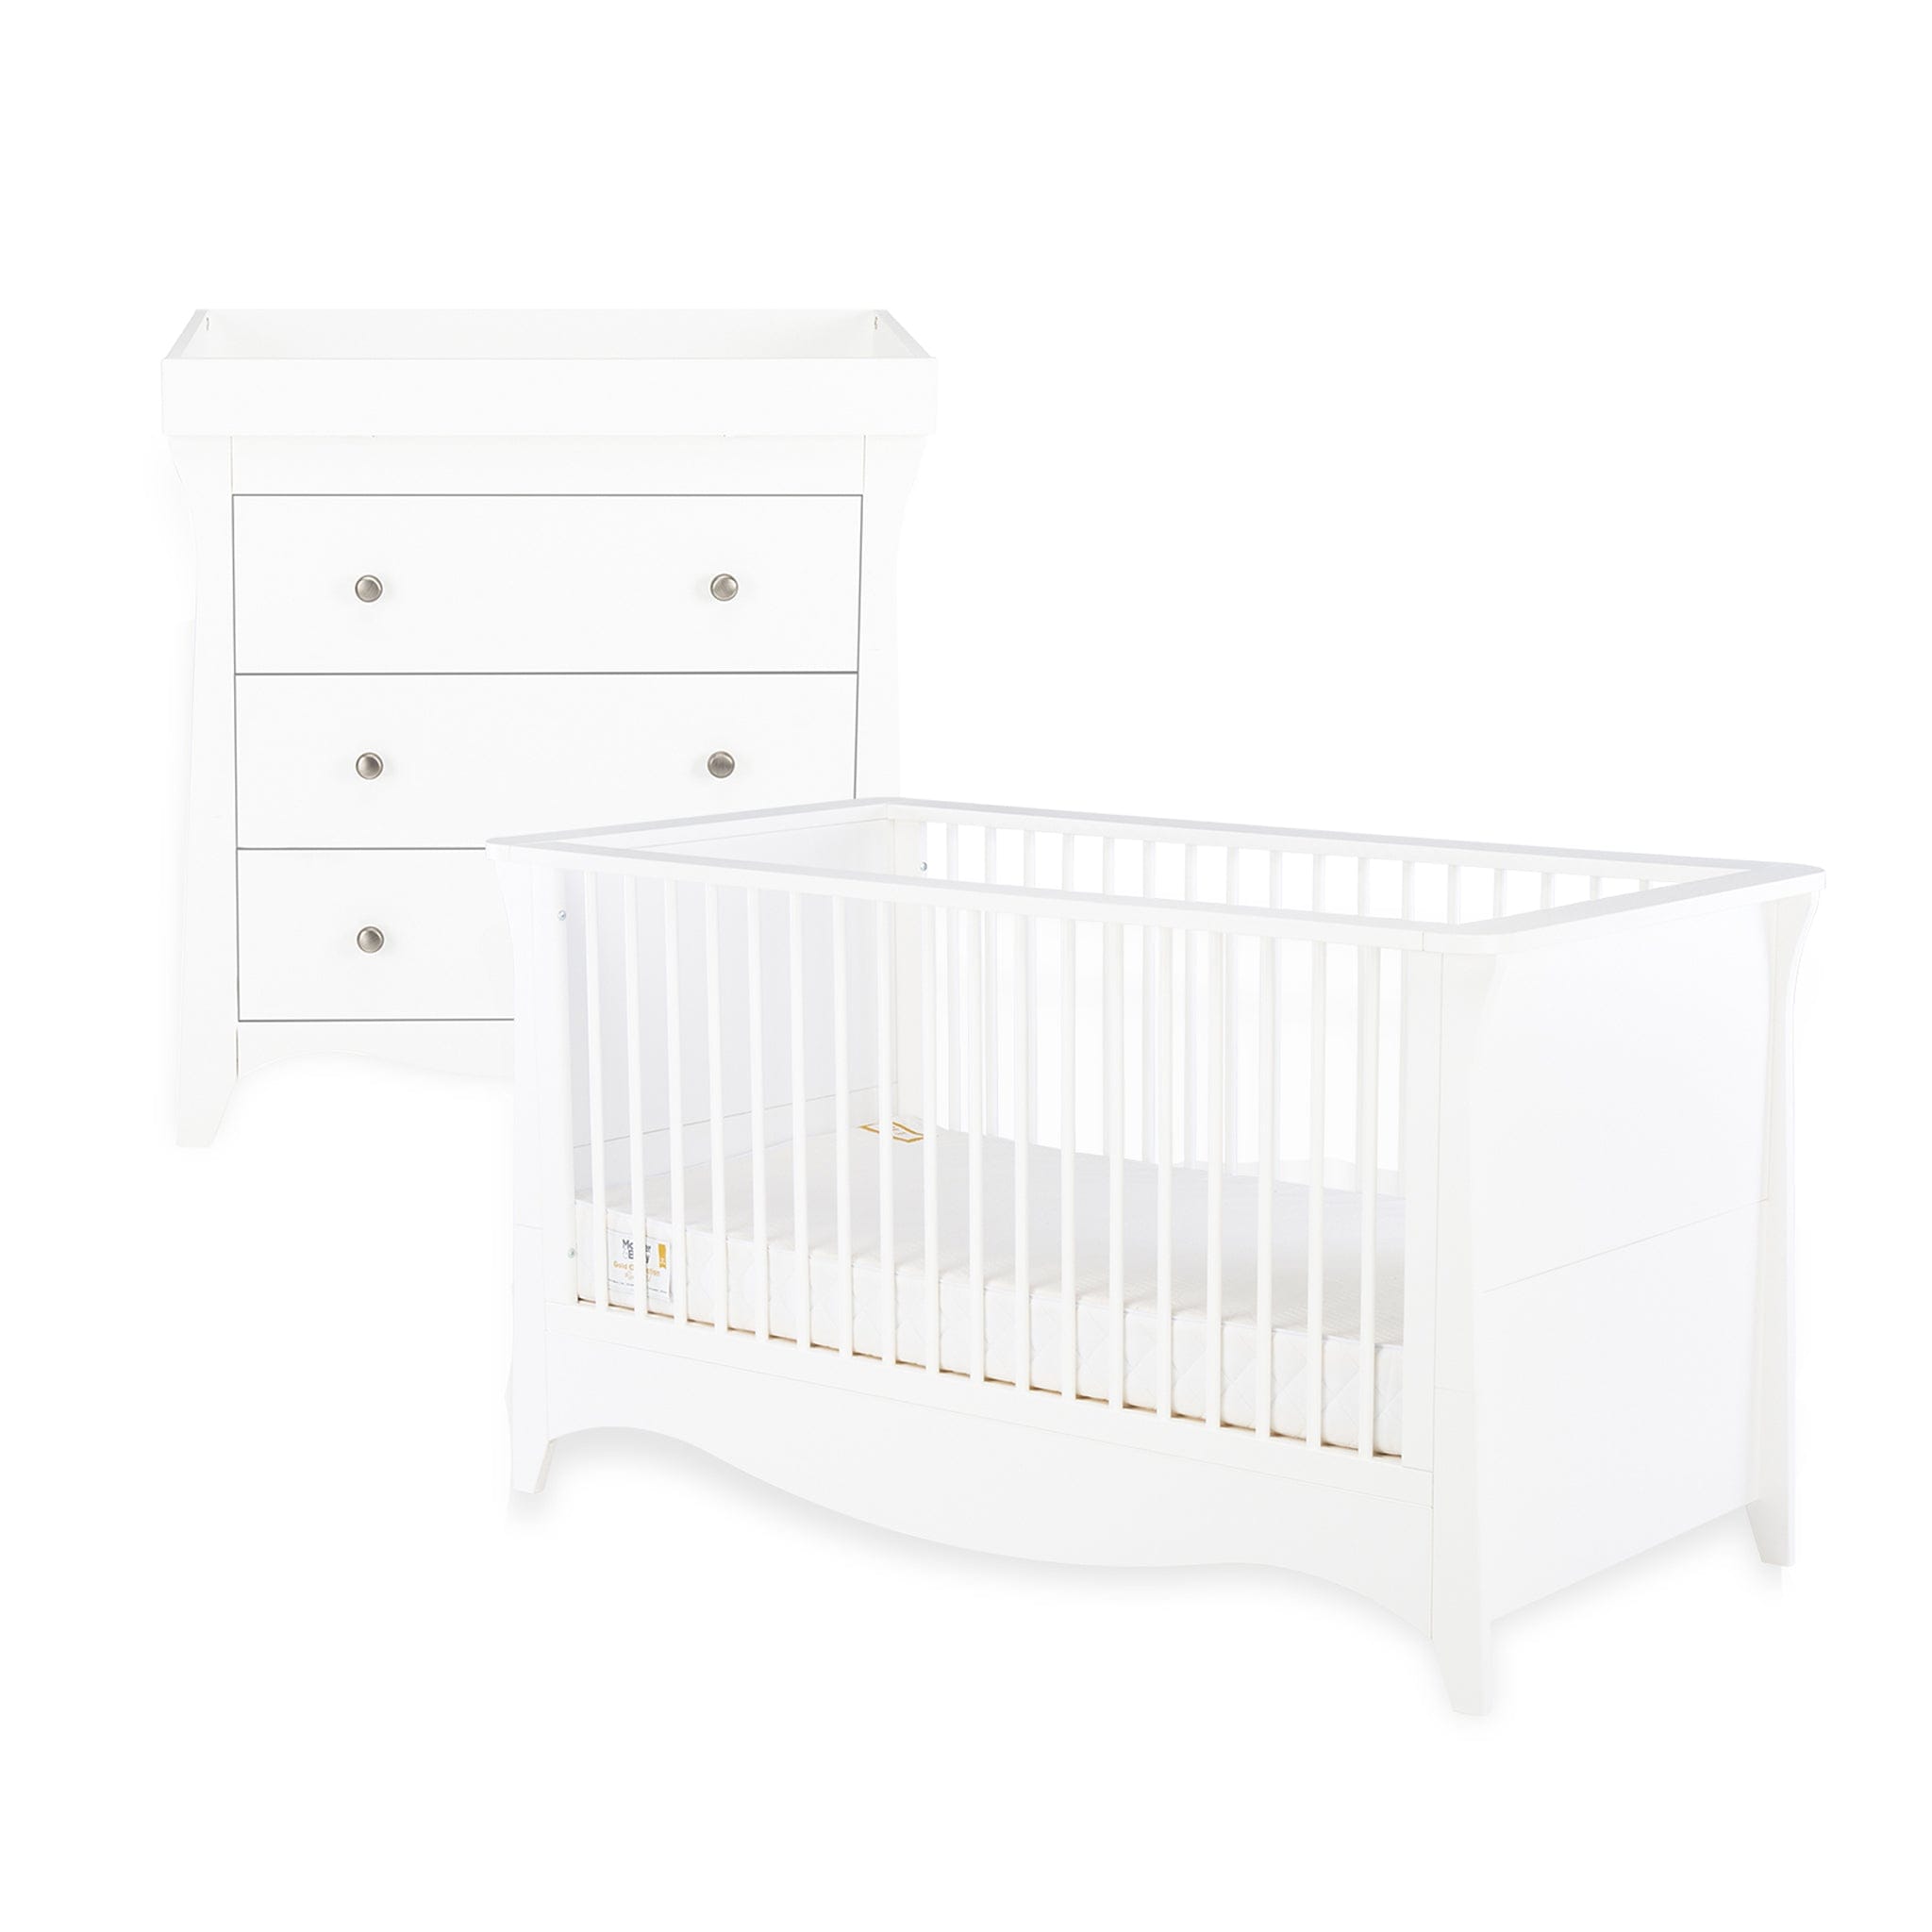 CuddleCo Nursery Room Sets CuddleCo Clara 2 Piece Cot Bed Set in White